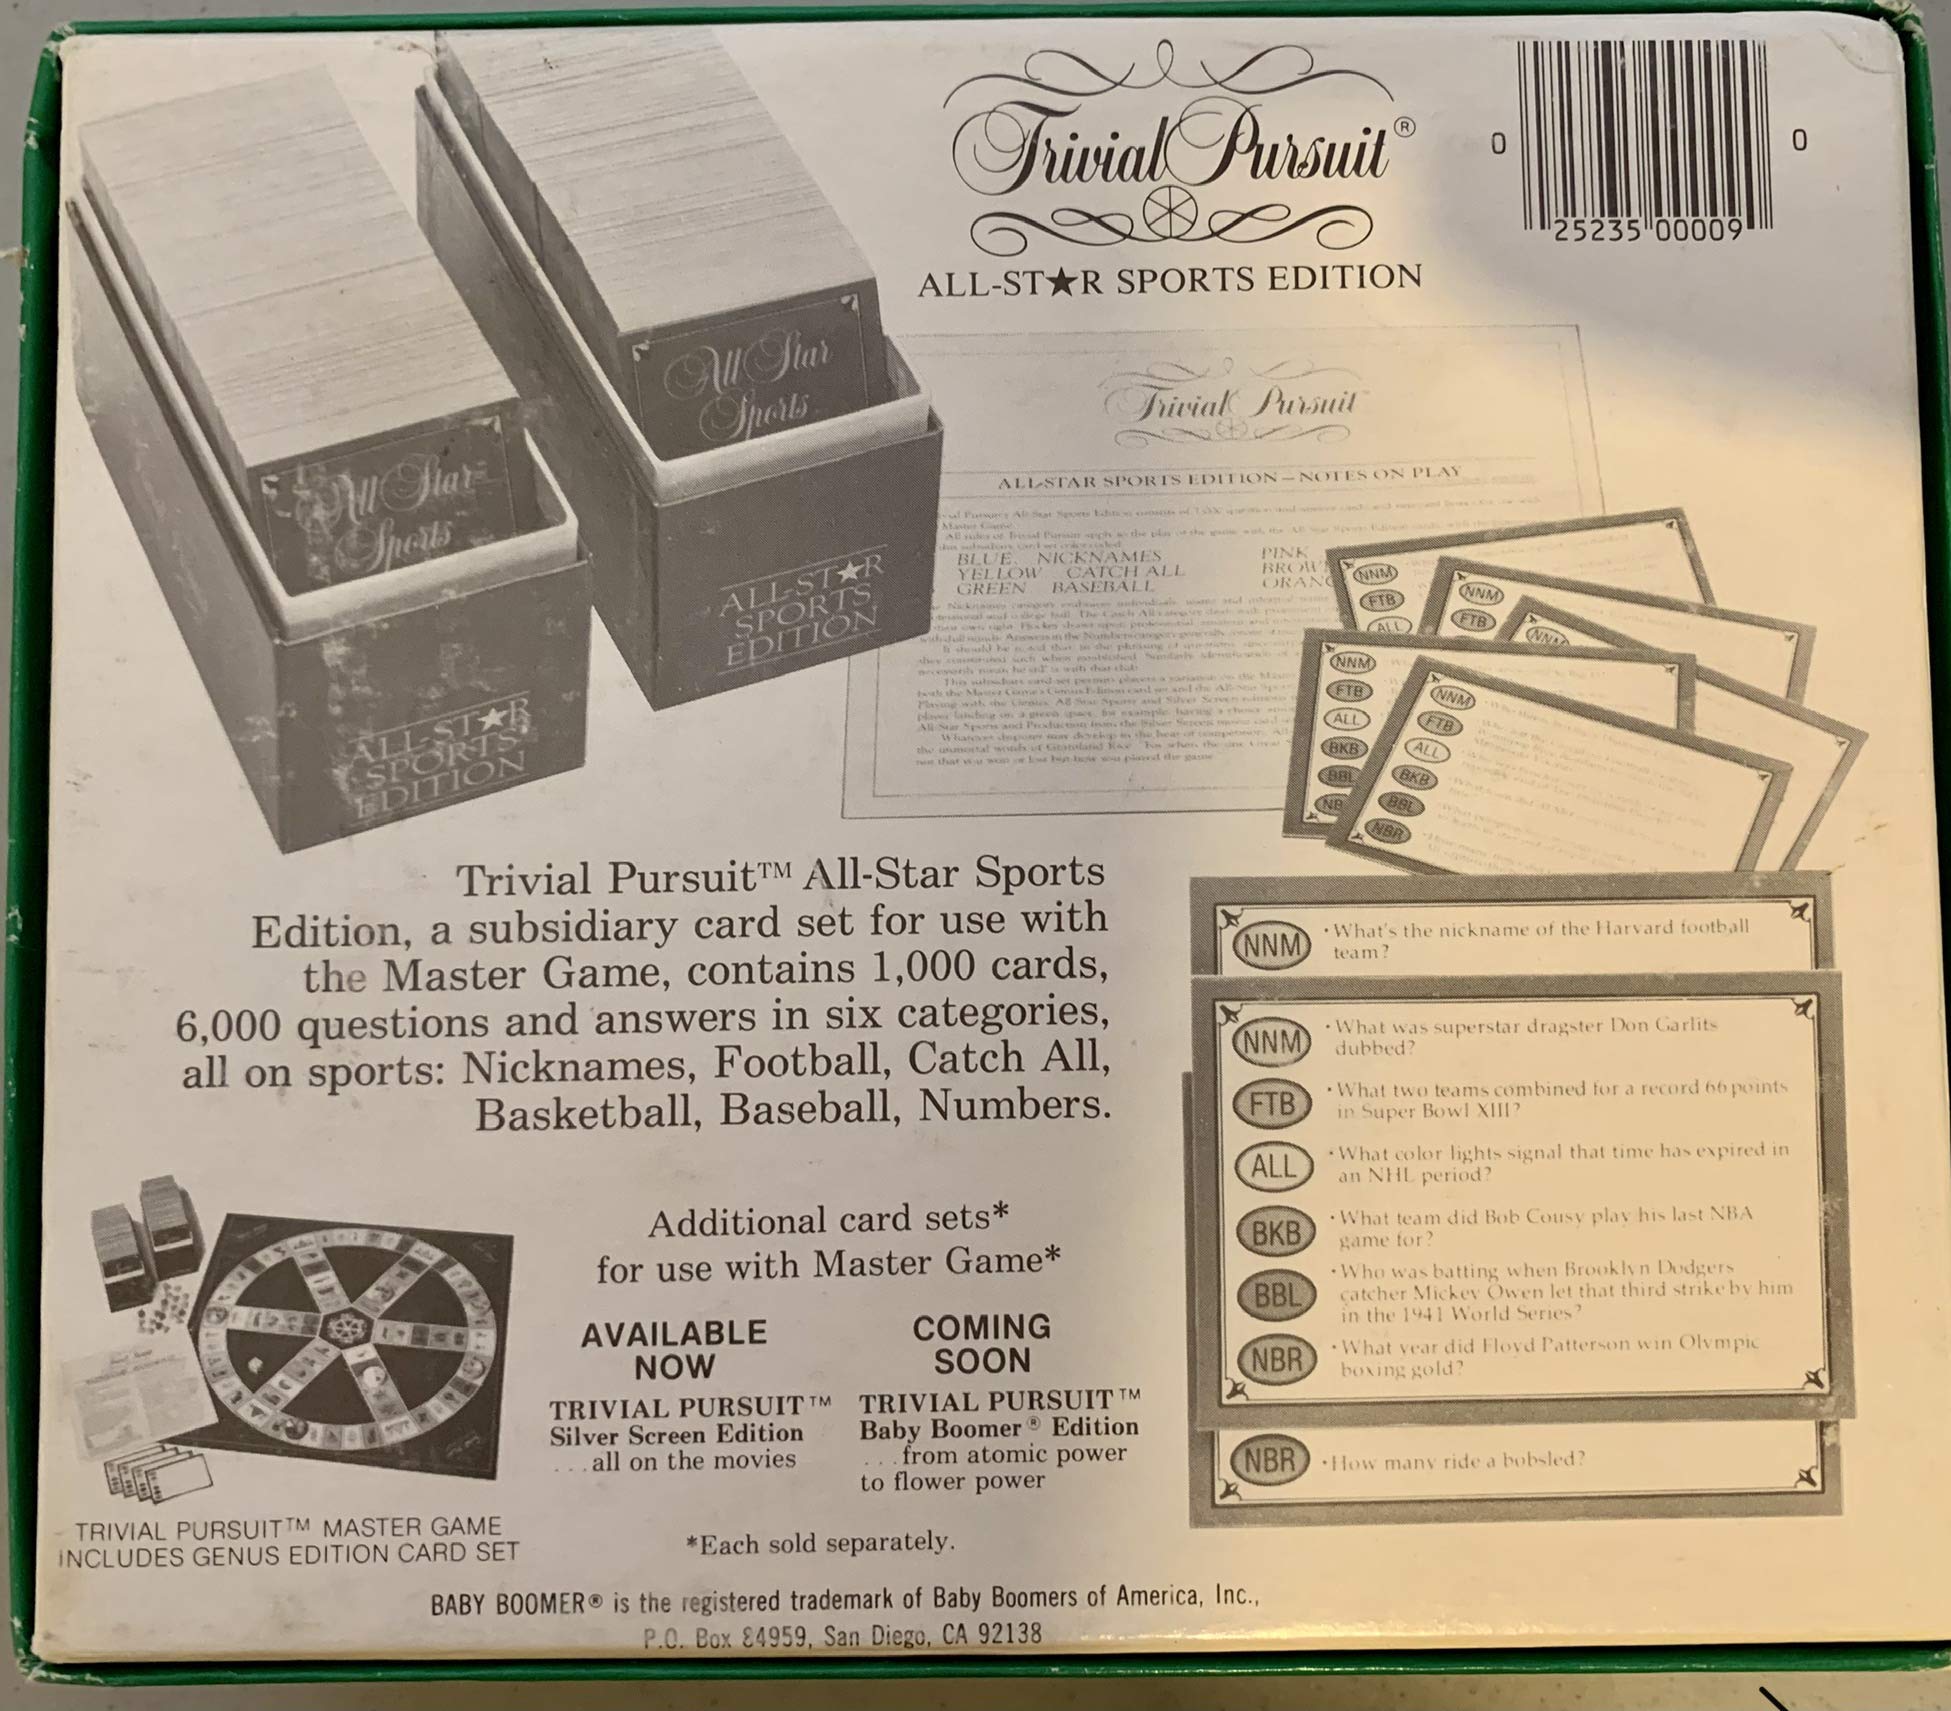 Trivial Pursuit All-Star Sports Edition (Subsidiary card set for use with Master Game)Outdated Version